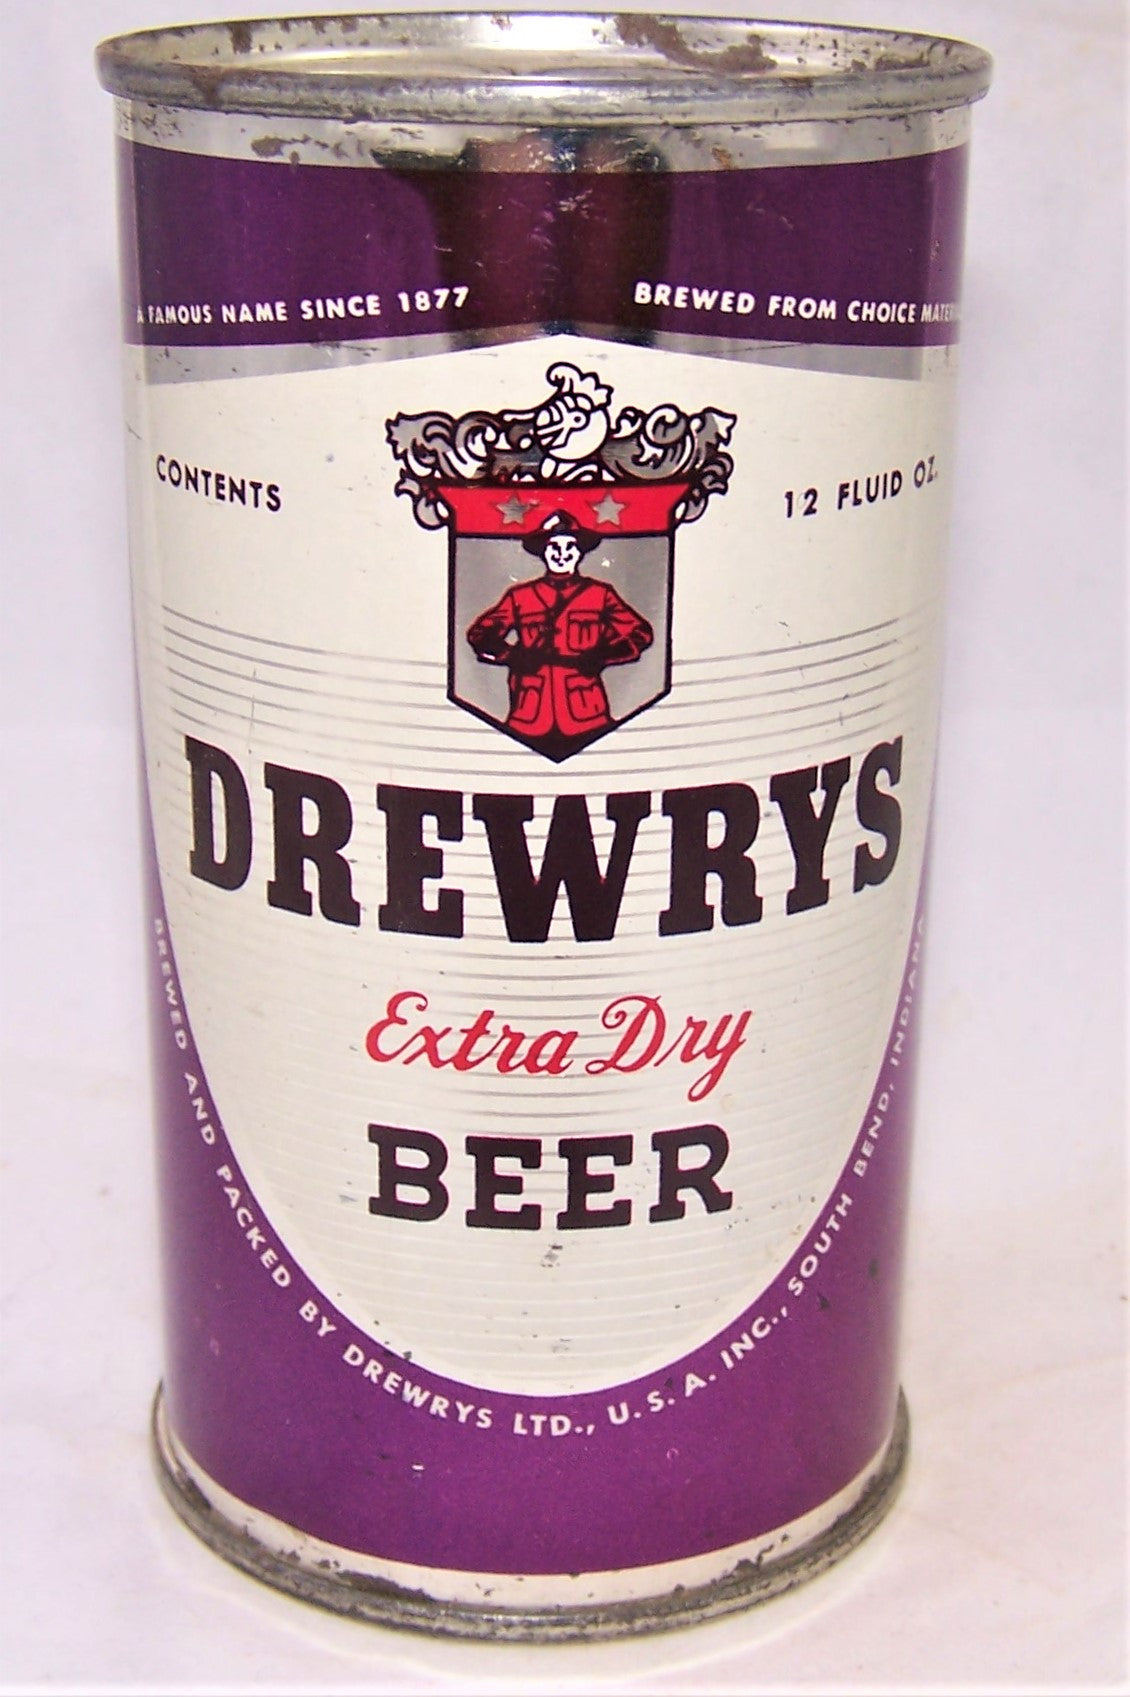 Drewrys Extra Dry (Your Character) USBC 57-03, Grade 1/1+ Sold on 05/03/19